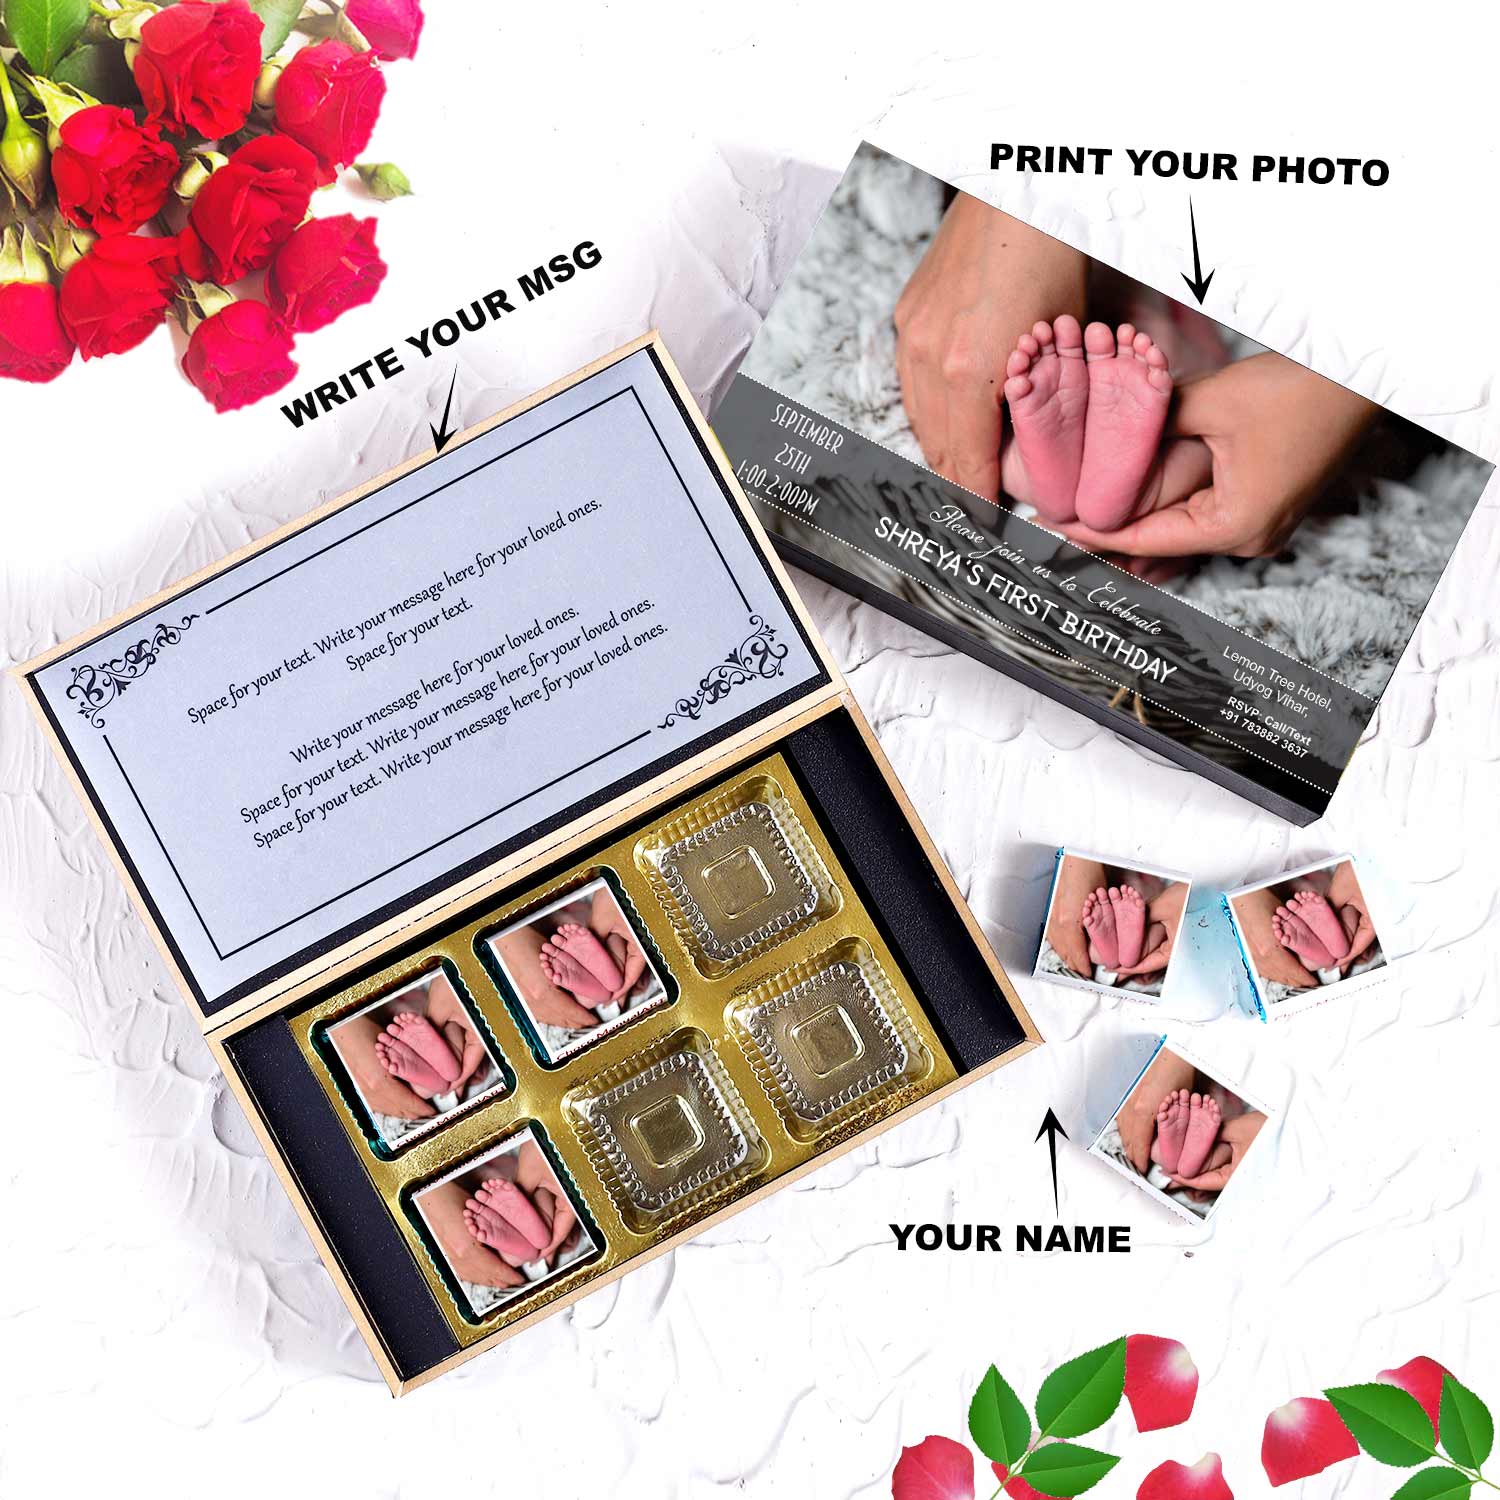 customized black wooden box with wrapper of all-printed chocolates. There is also a personalized message printed on Message paper inside the box.